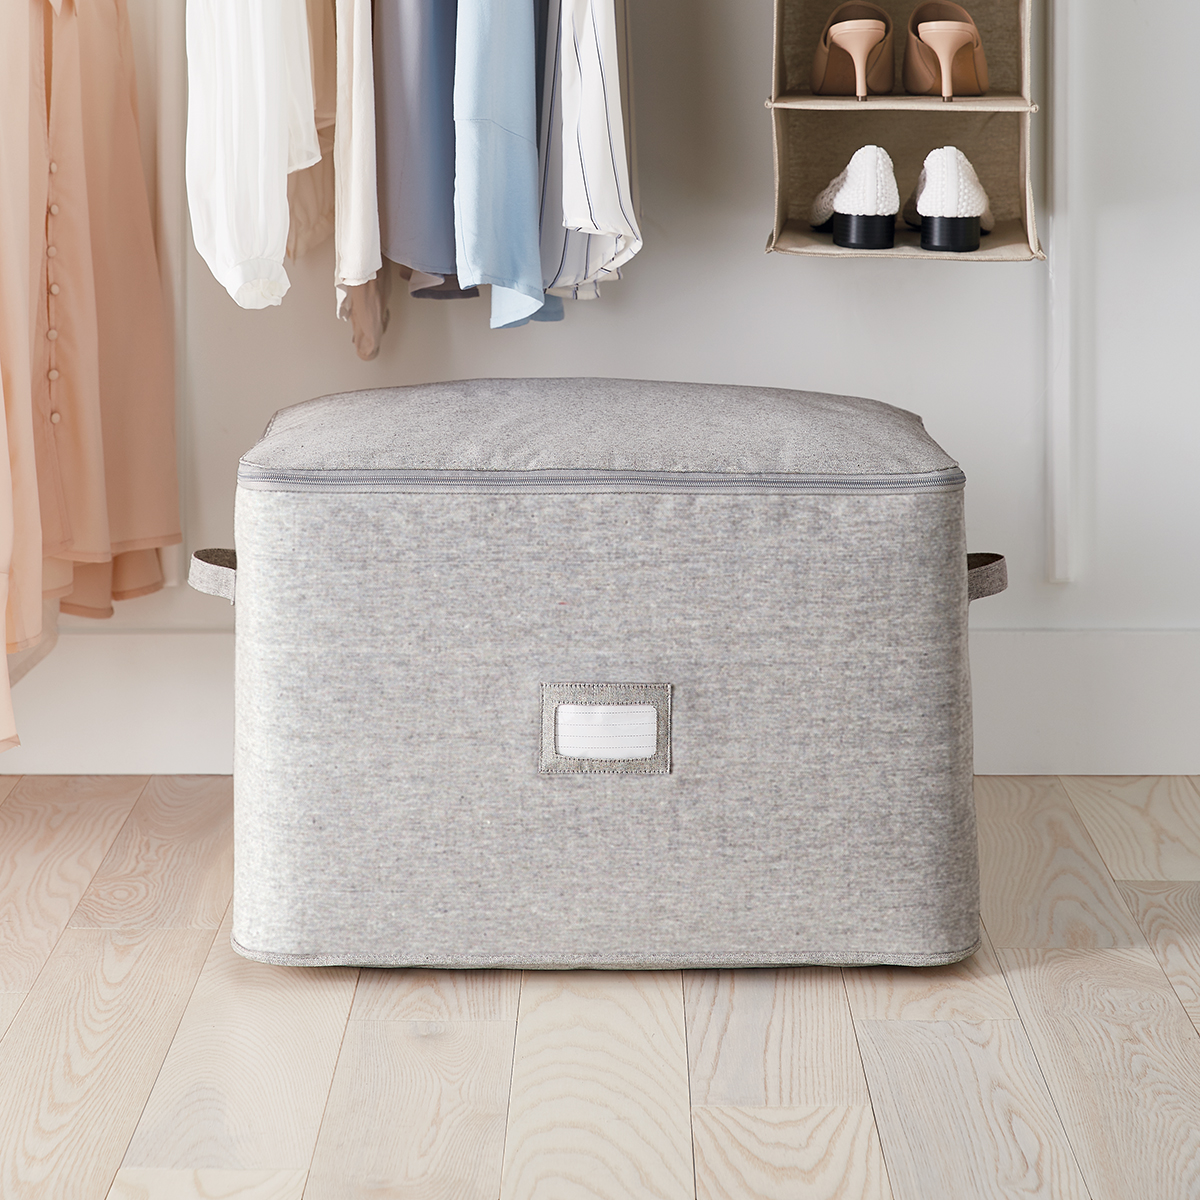 https://www.containerstore.com/catalogimages/462921/10079385-large-storage-bag-grey-PVL.jpeg